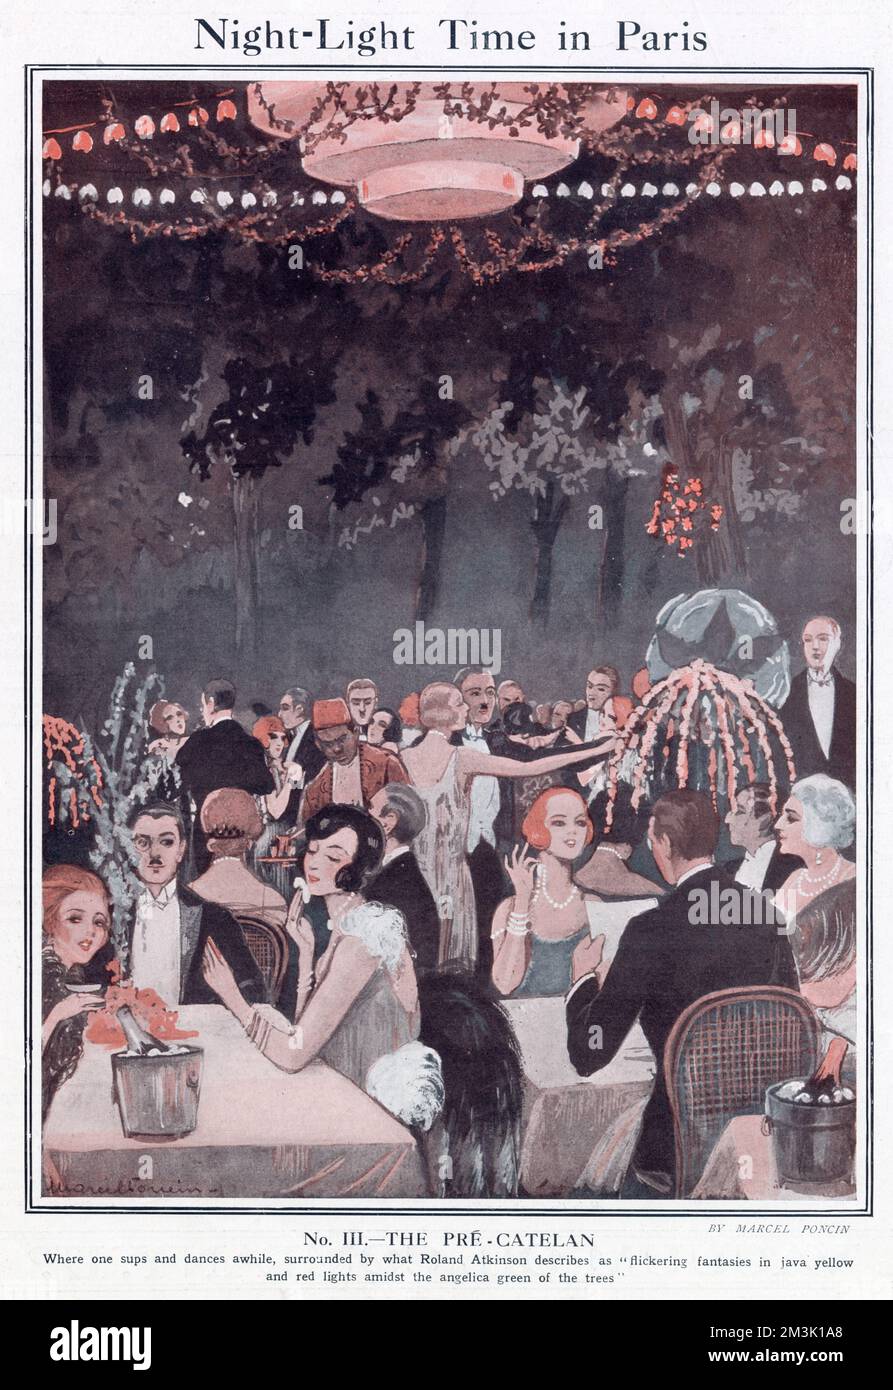 The interior of the chic Parisian night-club, the 'Pre-Catelan'.  Ladies and gentlemen, in formal evening attire, are shown dining and dancing against a backdrop of trees. Stock Photo